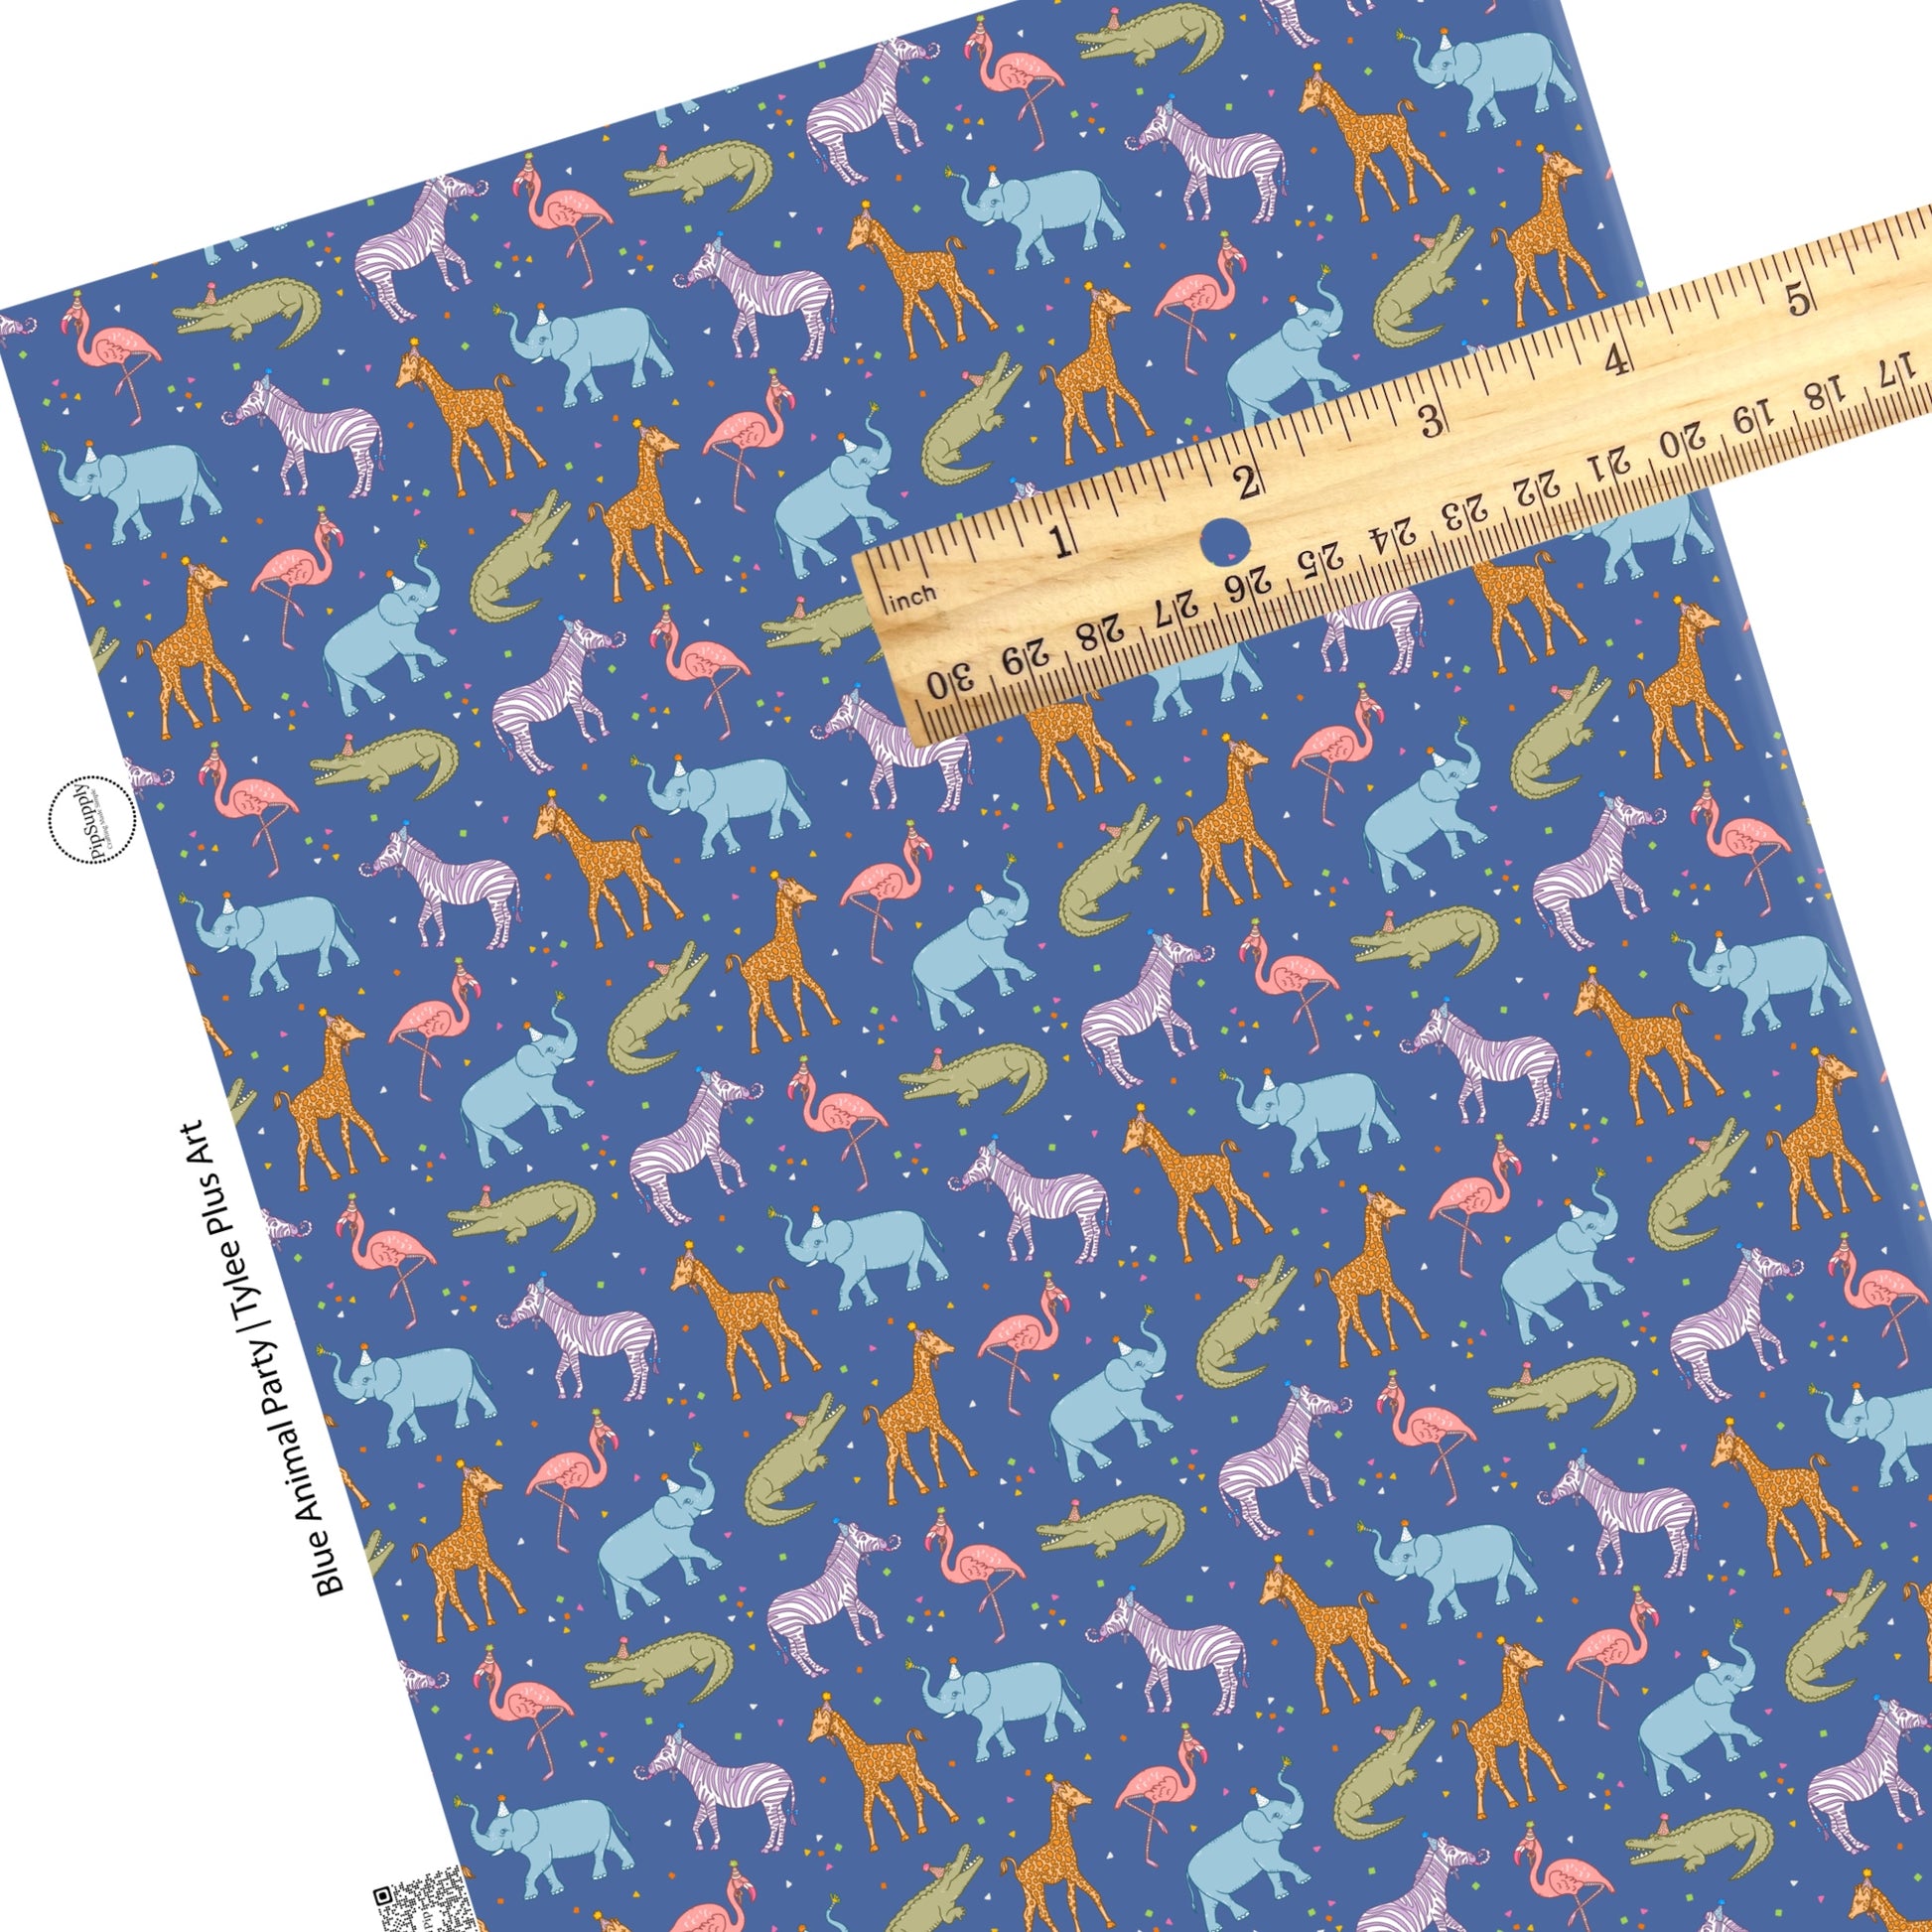 These celebration faux leather sheets contain the following design elements: colorful animals with party hats on blue. Our CPSIA compliant faux leather sheets or rolls can be used for all types of crafting projects.